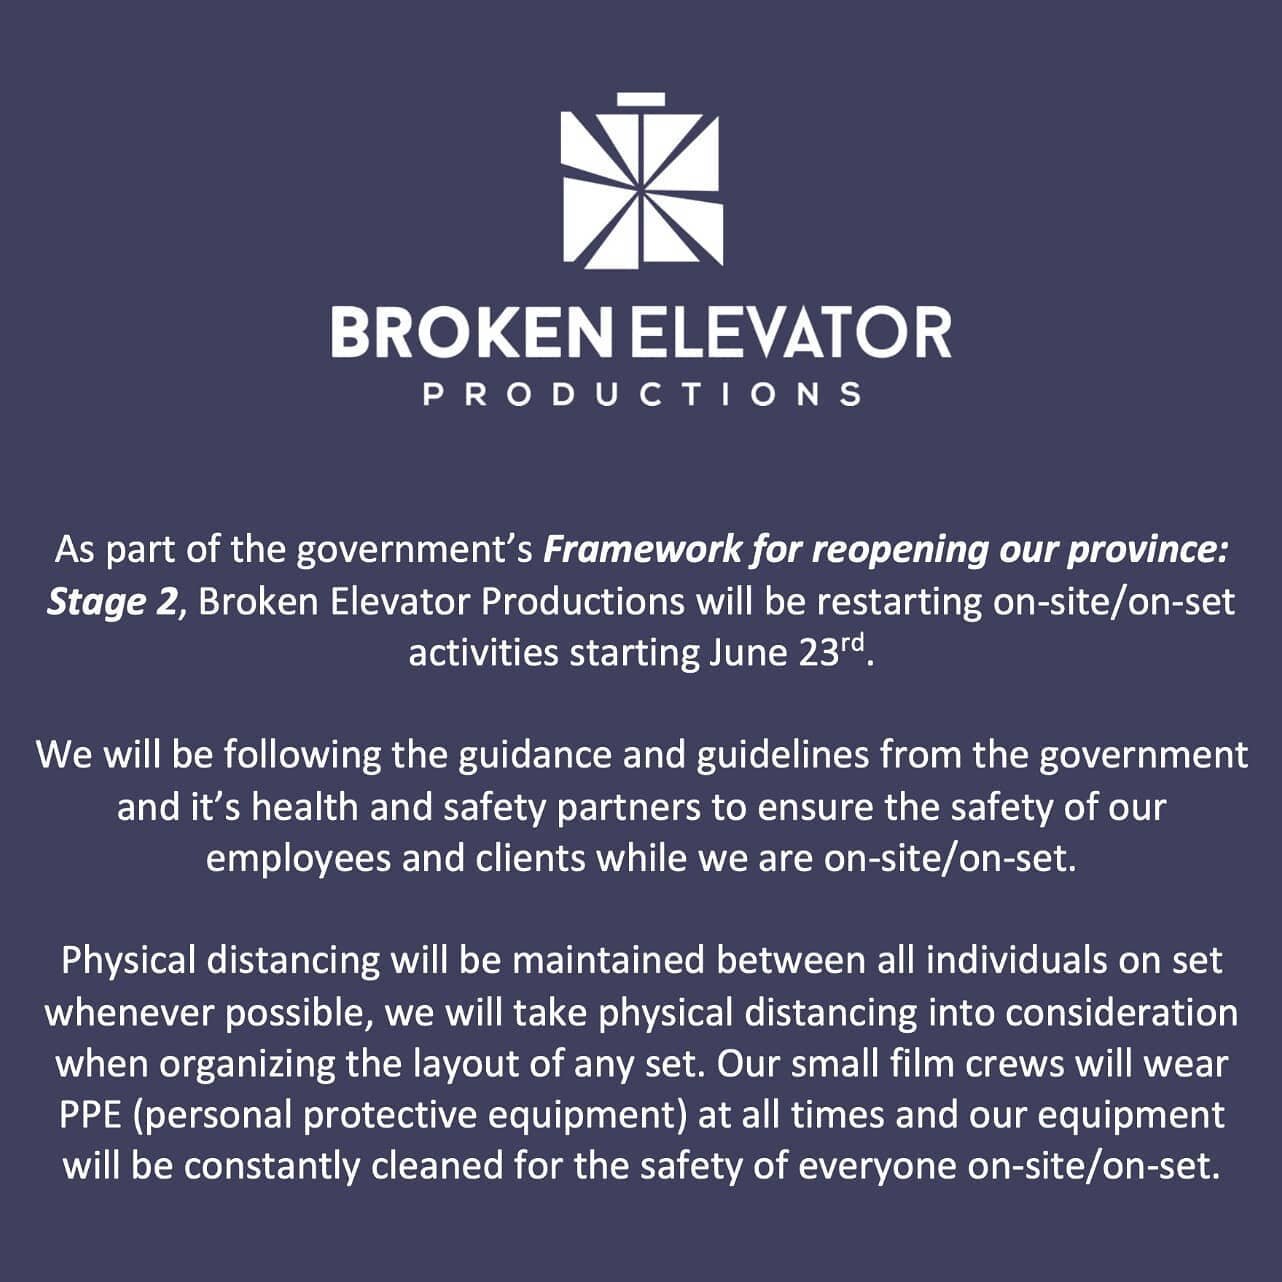 We are restarting our on-site/on-set activities starting tomorrow, June 24. Our team is ready to get back to doing what we love most! We will be taking all the precautions necessary while also making professional video content for our clients!

Feel 